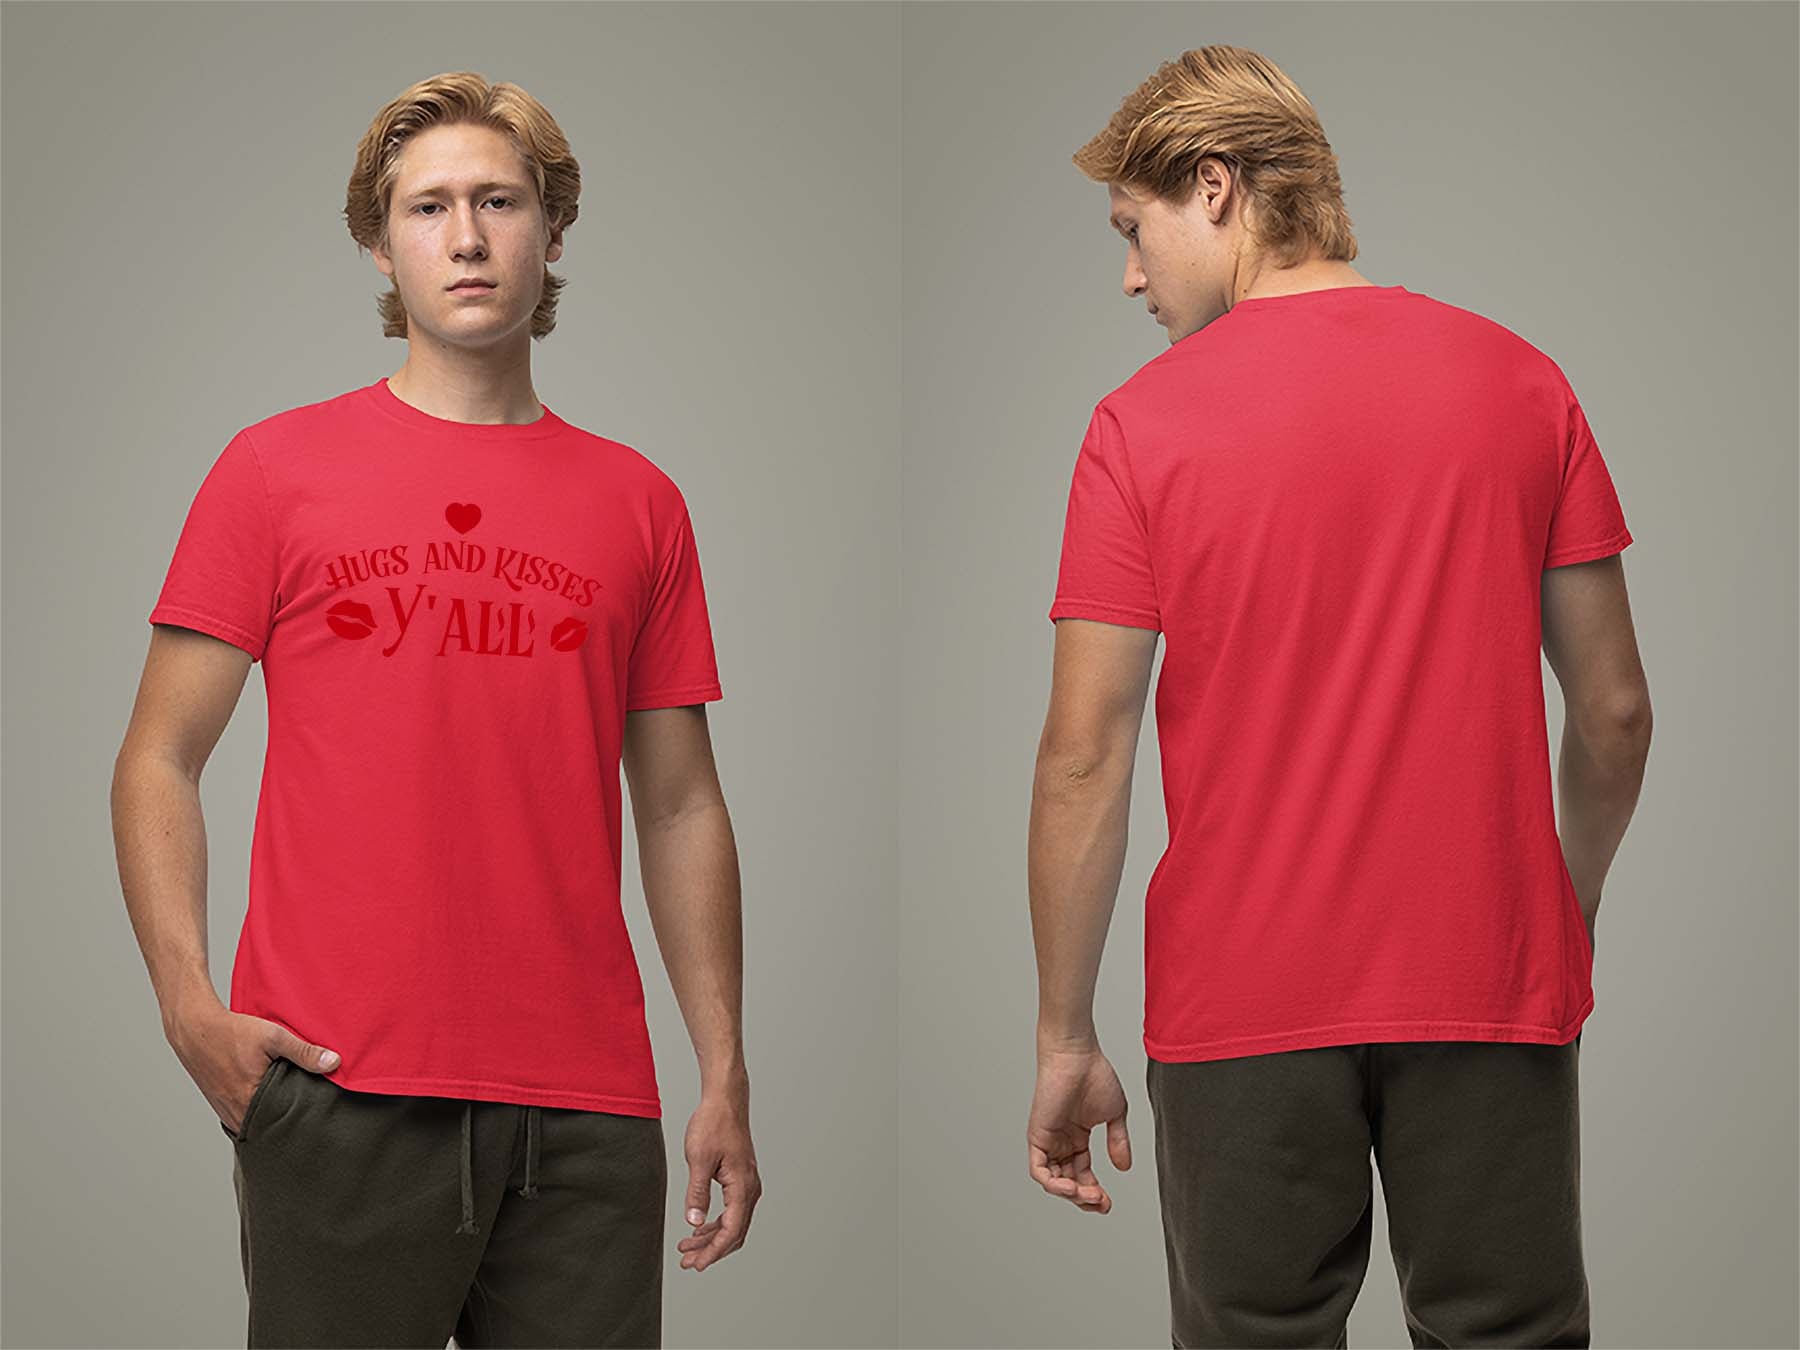 Fat Dave Hugs and Kisses Y'all T-Shirt Small Red